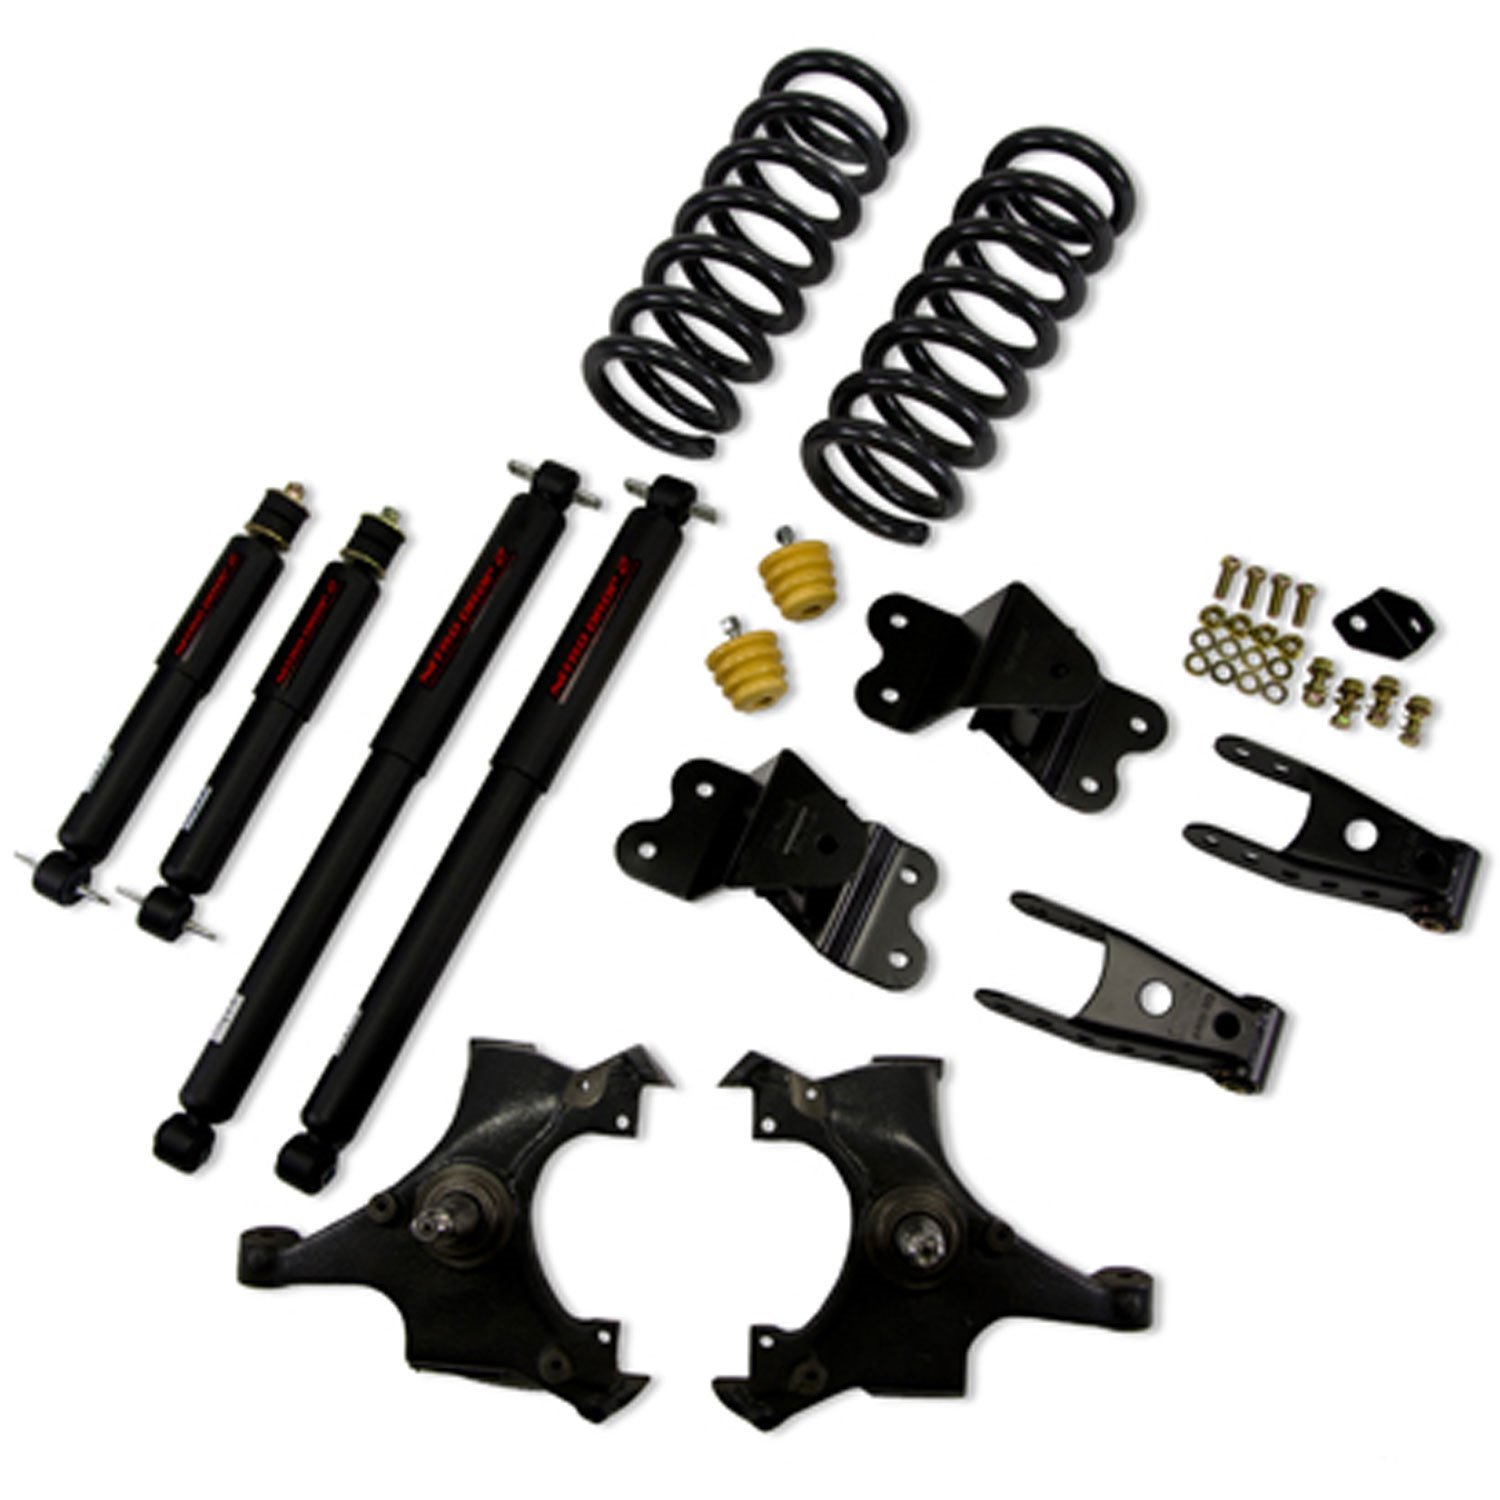 Complete Lowering Kit for 1988-1991 Chevy/GMC 1500 Standard Cab